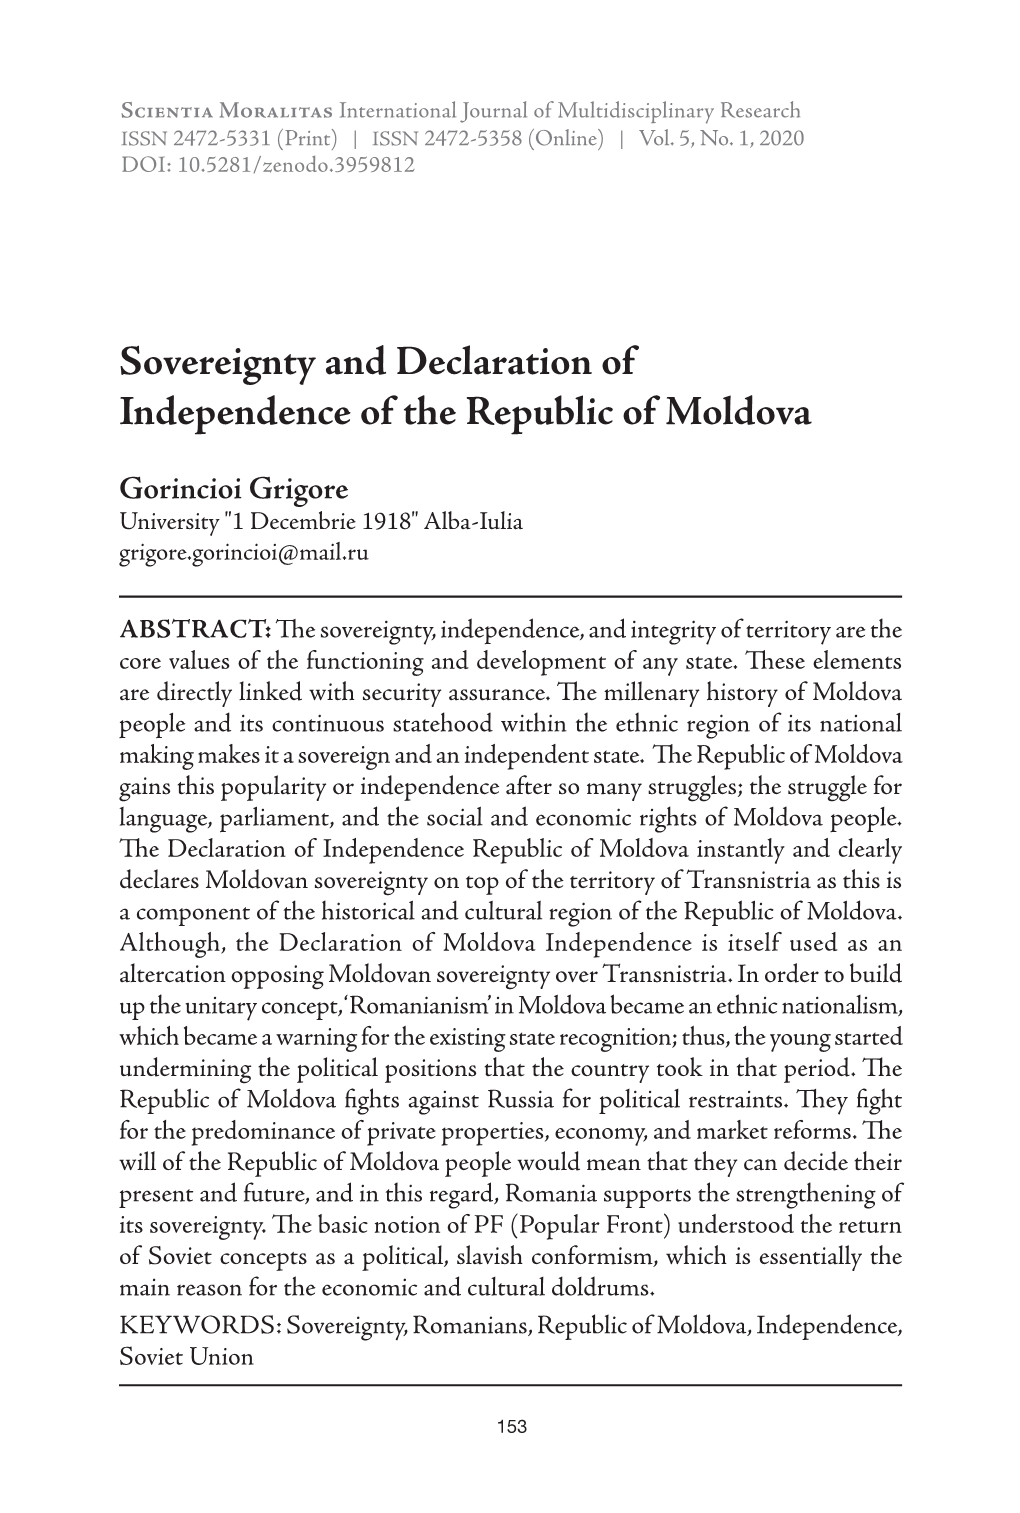 Sovereignty and Declaration of Independence of the Republic of Moldova